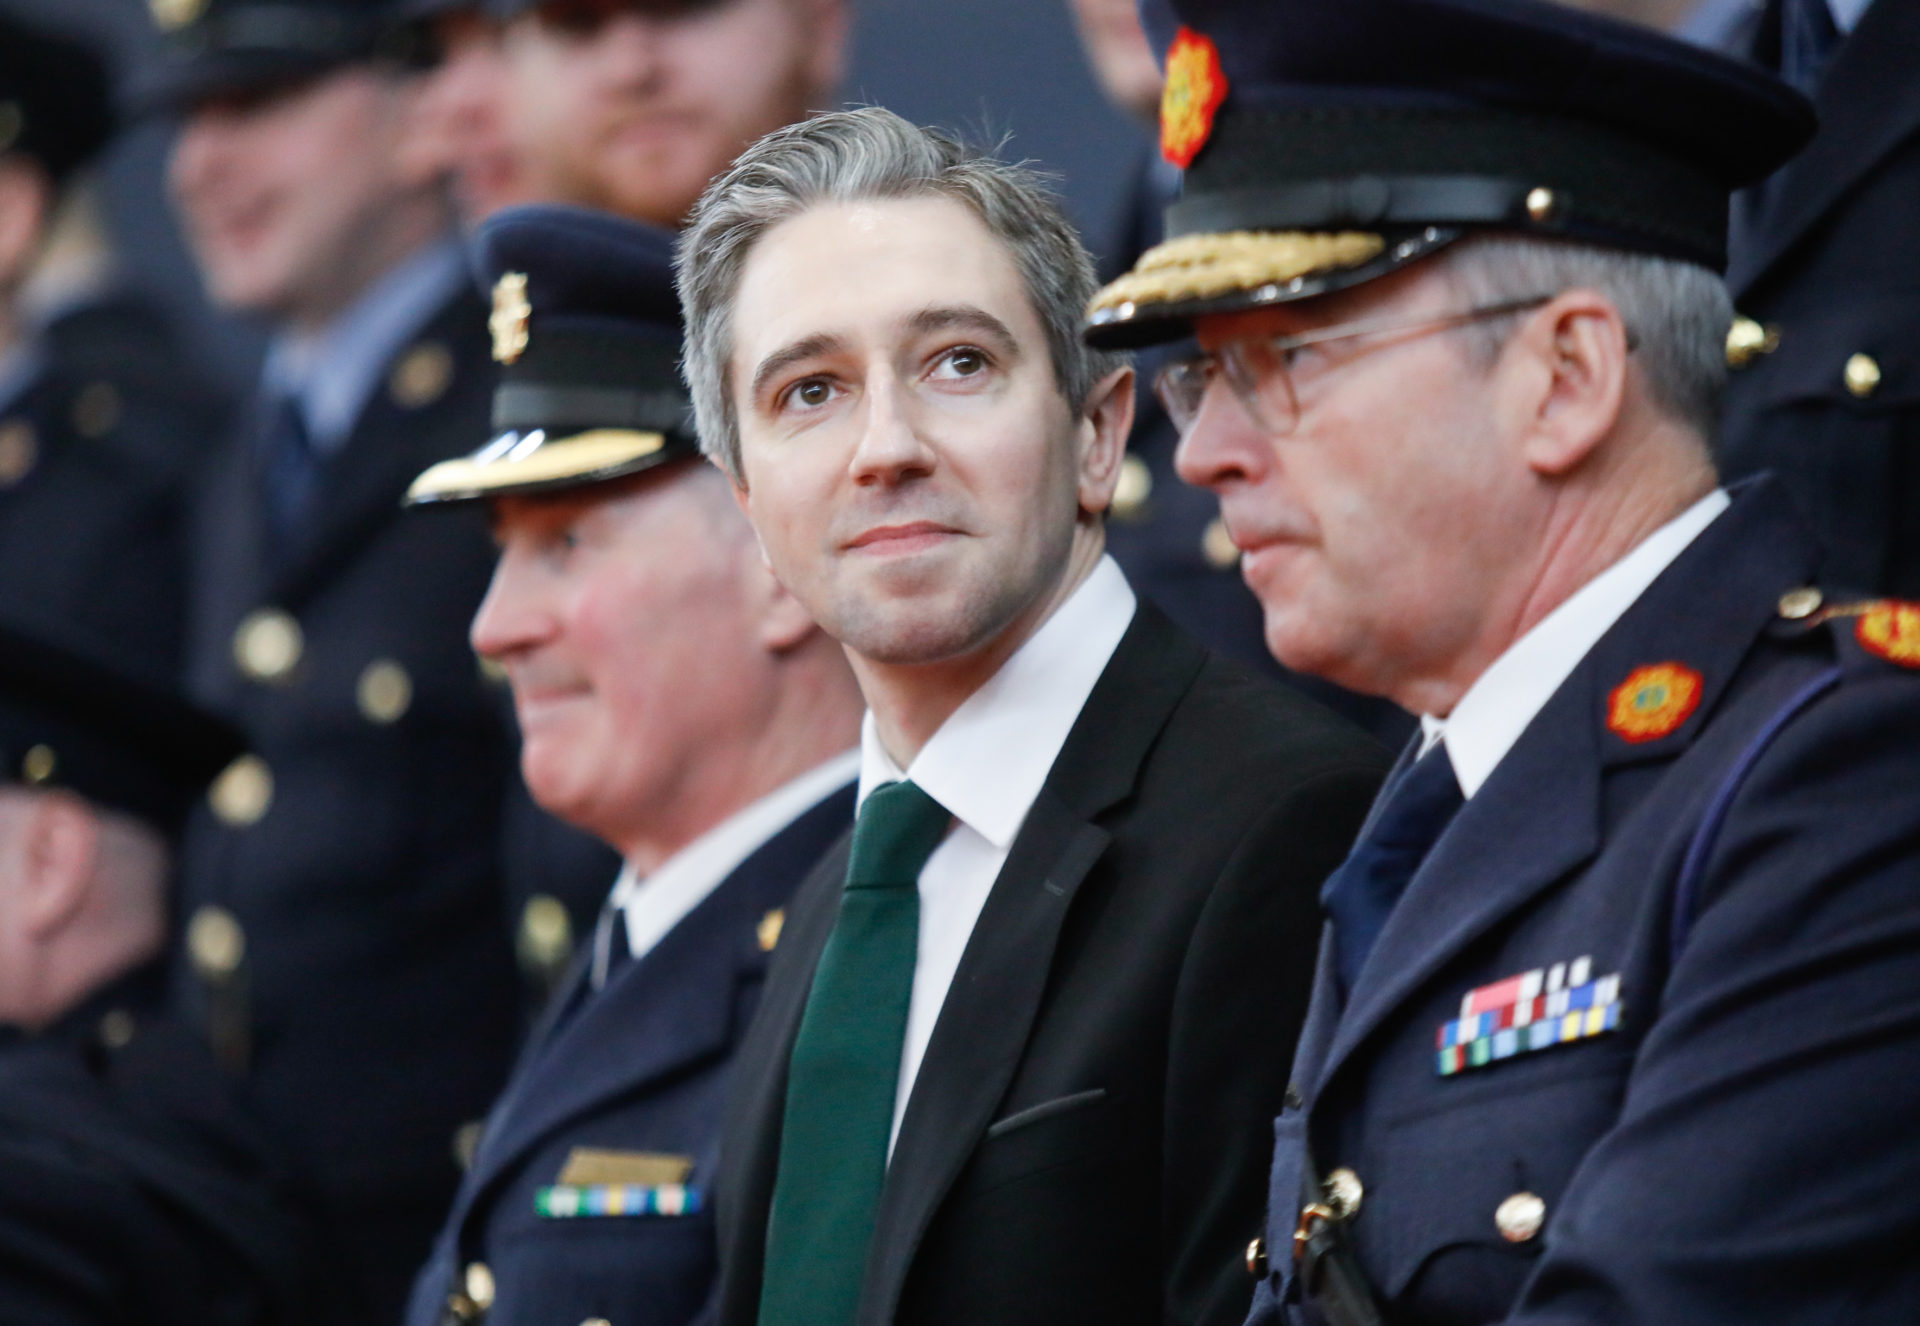 Justice Minister Simon Harris and Garda Commissioner Drew Harris at the passing out ceremony in Templemore.